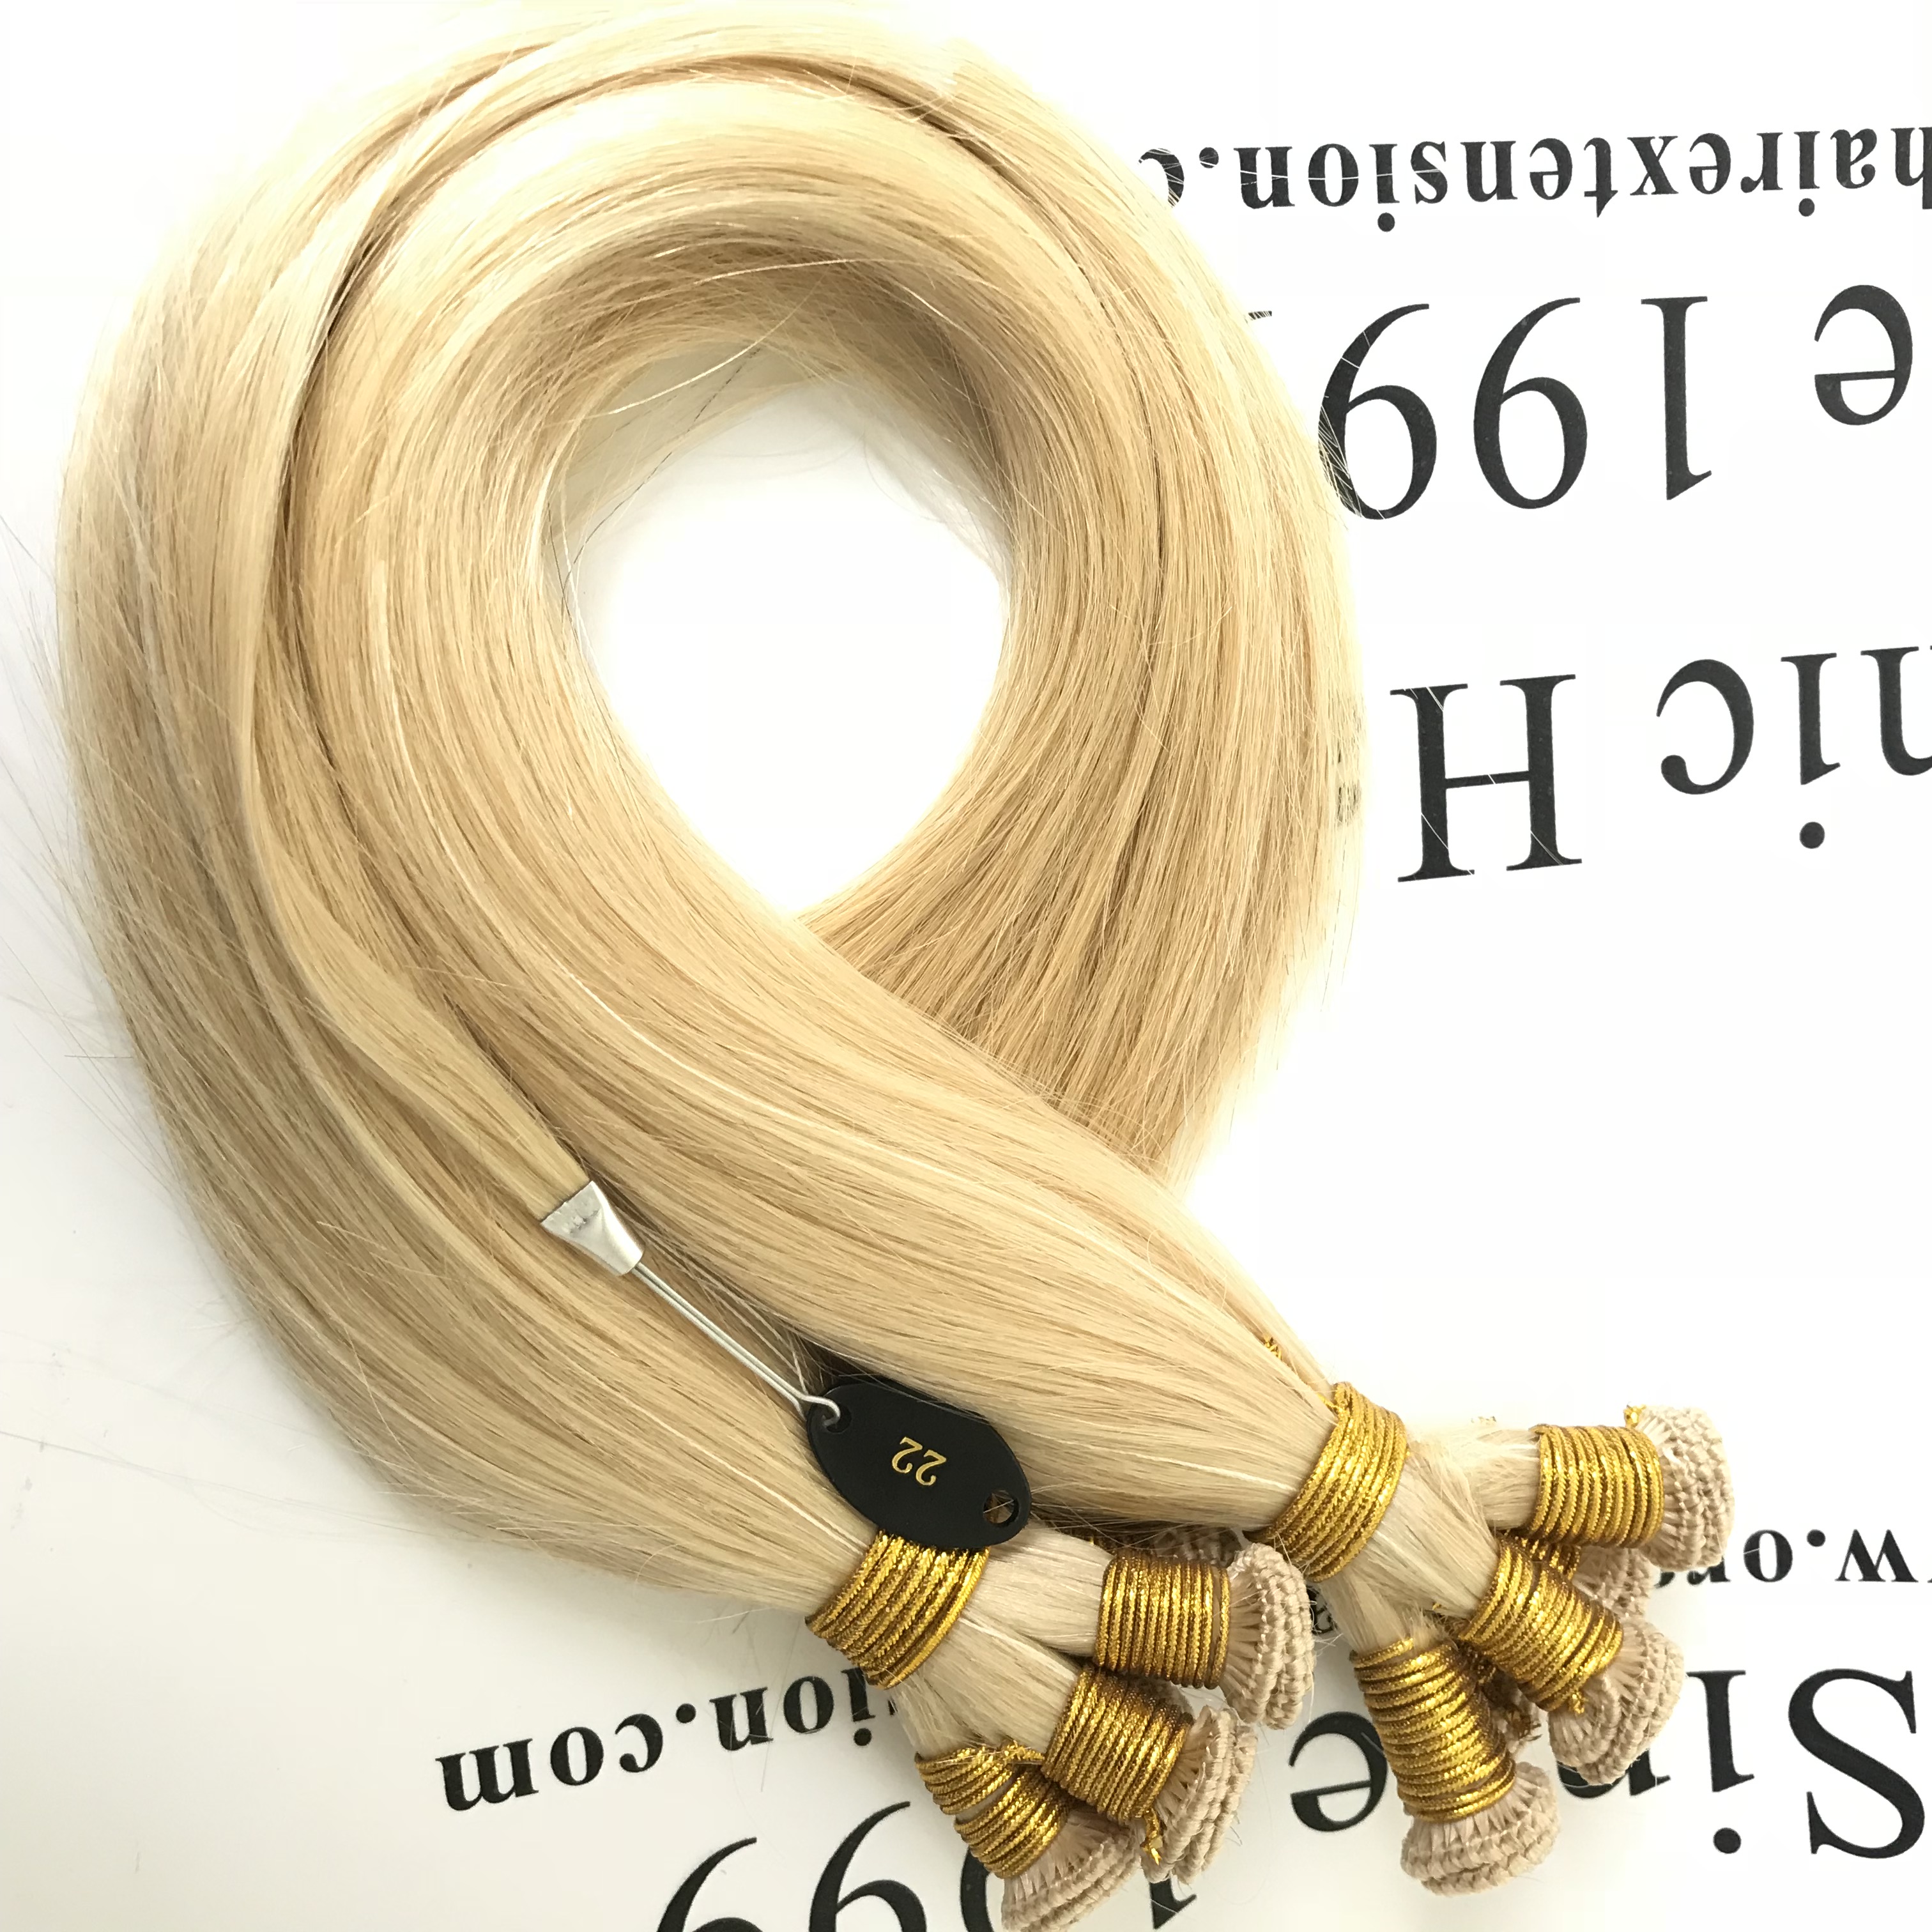  #1 choice for hand-tied hair extensions J06